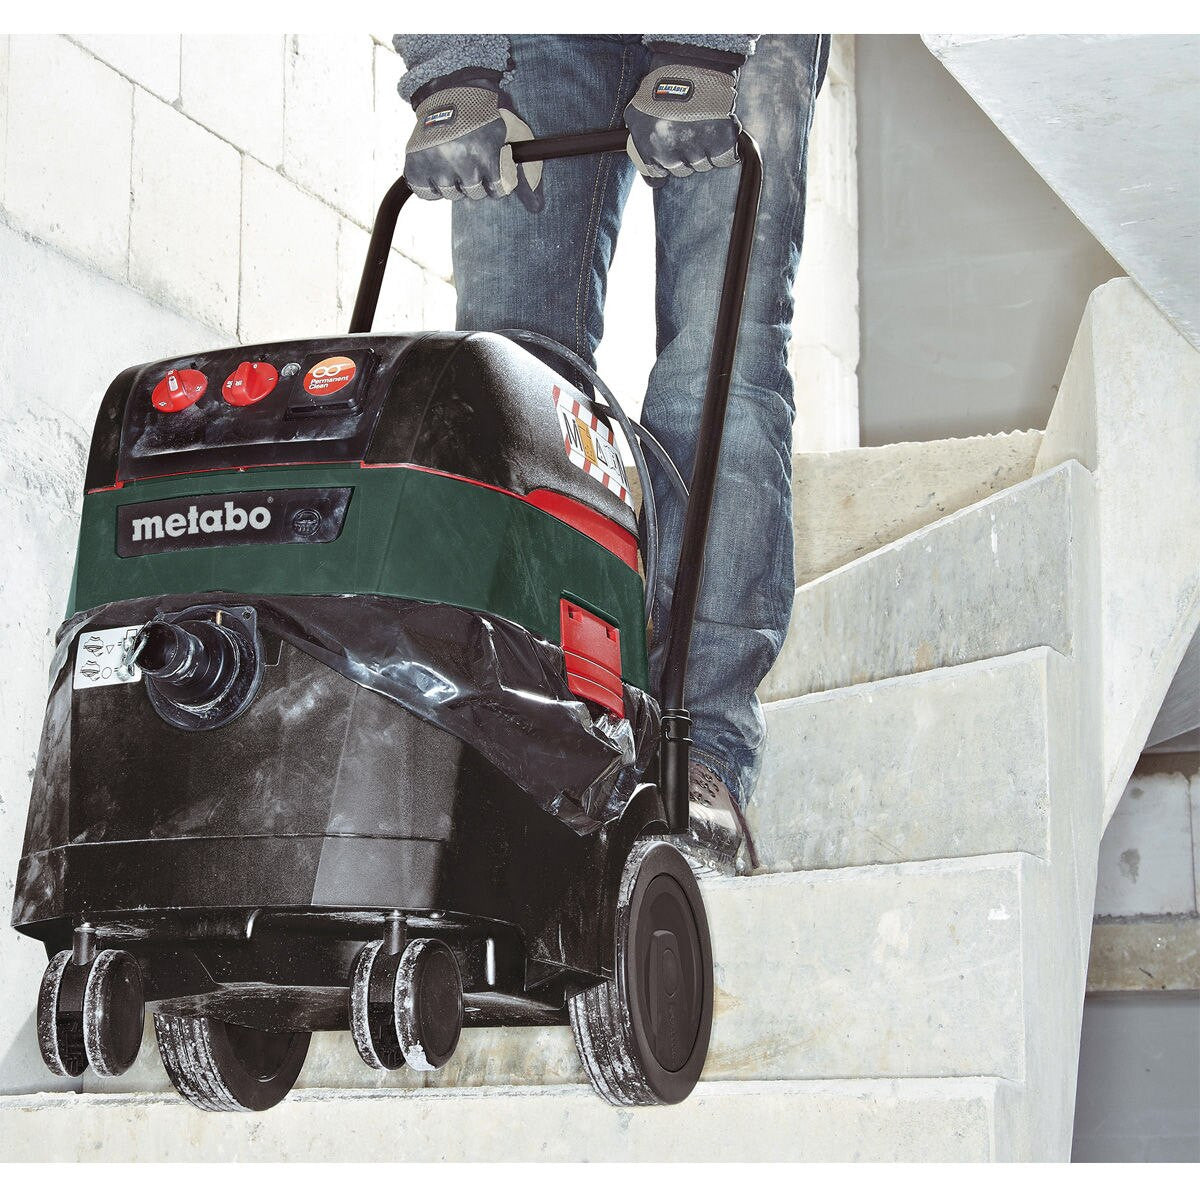 Metabo ASR35MACP All-Purpose Vacuum Cleaner 1400W with Measurement of Pressure Differentials (240V)